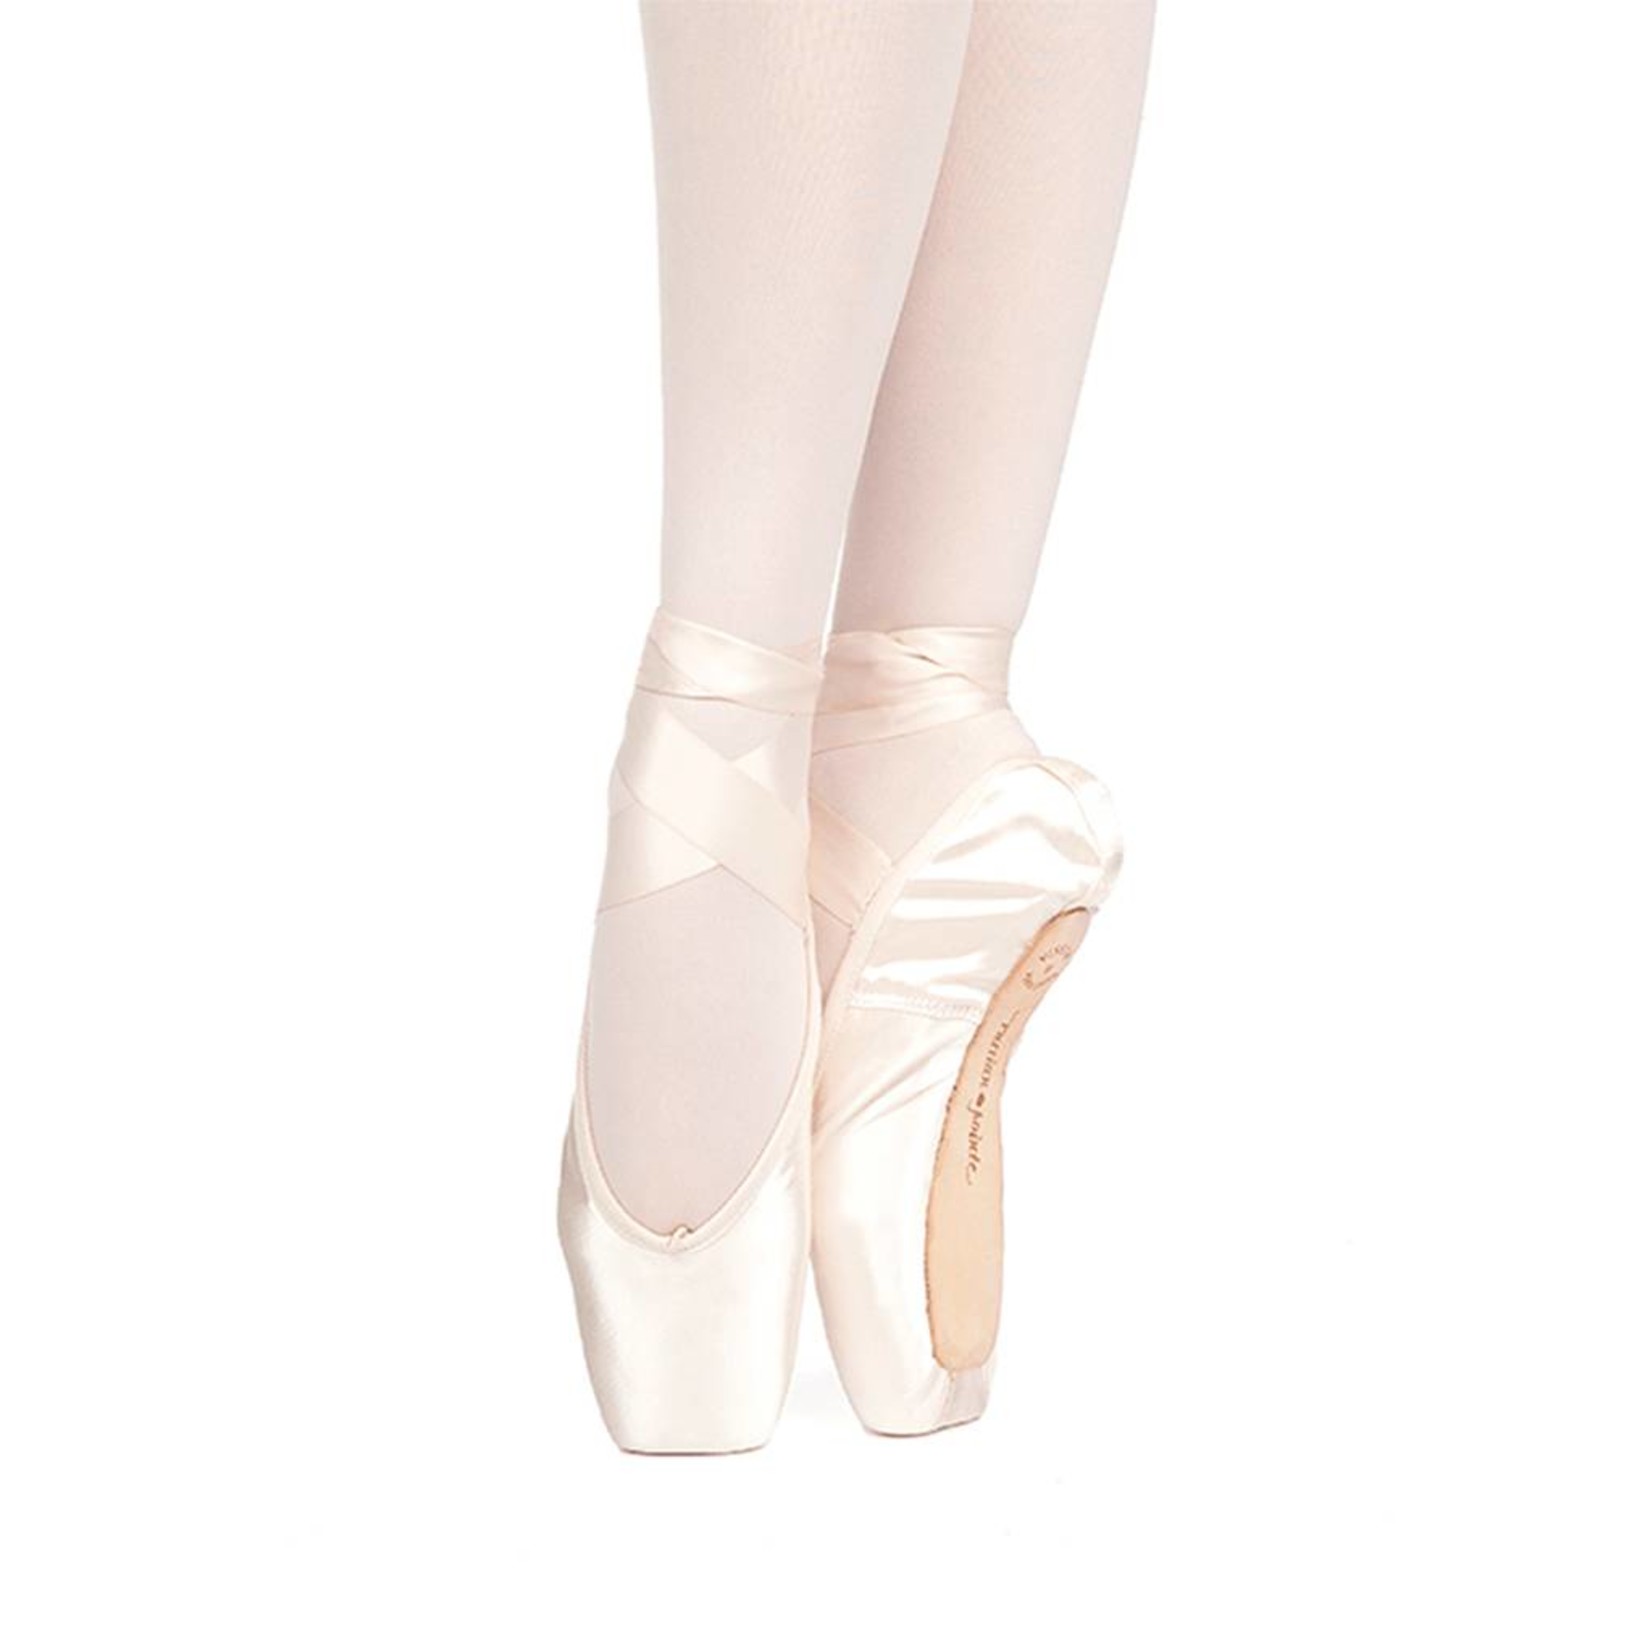 Russian Pointe Size 37.5: Muse U-Cut Pointe Shoes with Drawstring